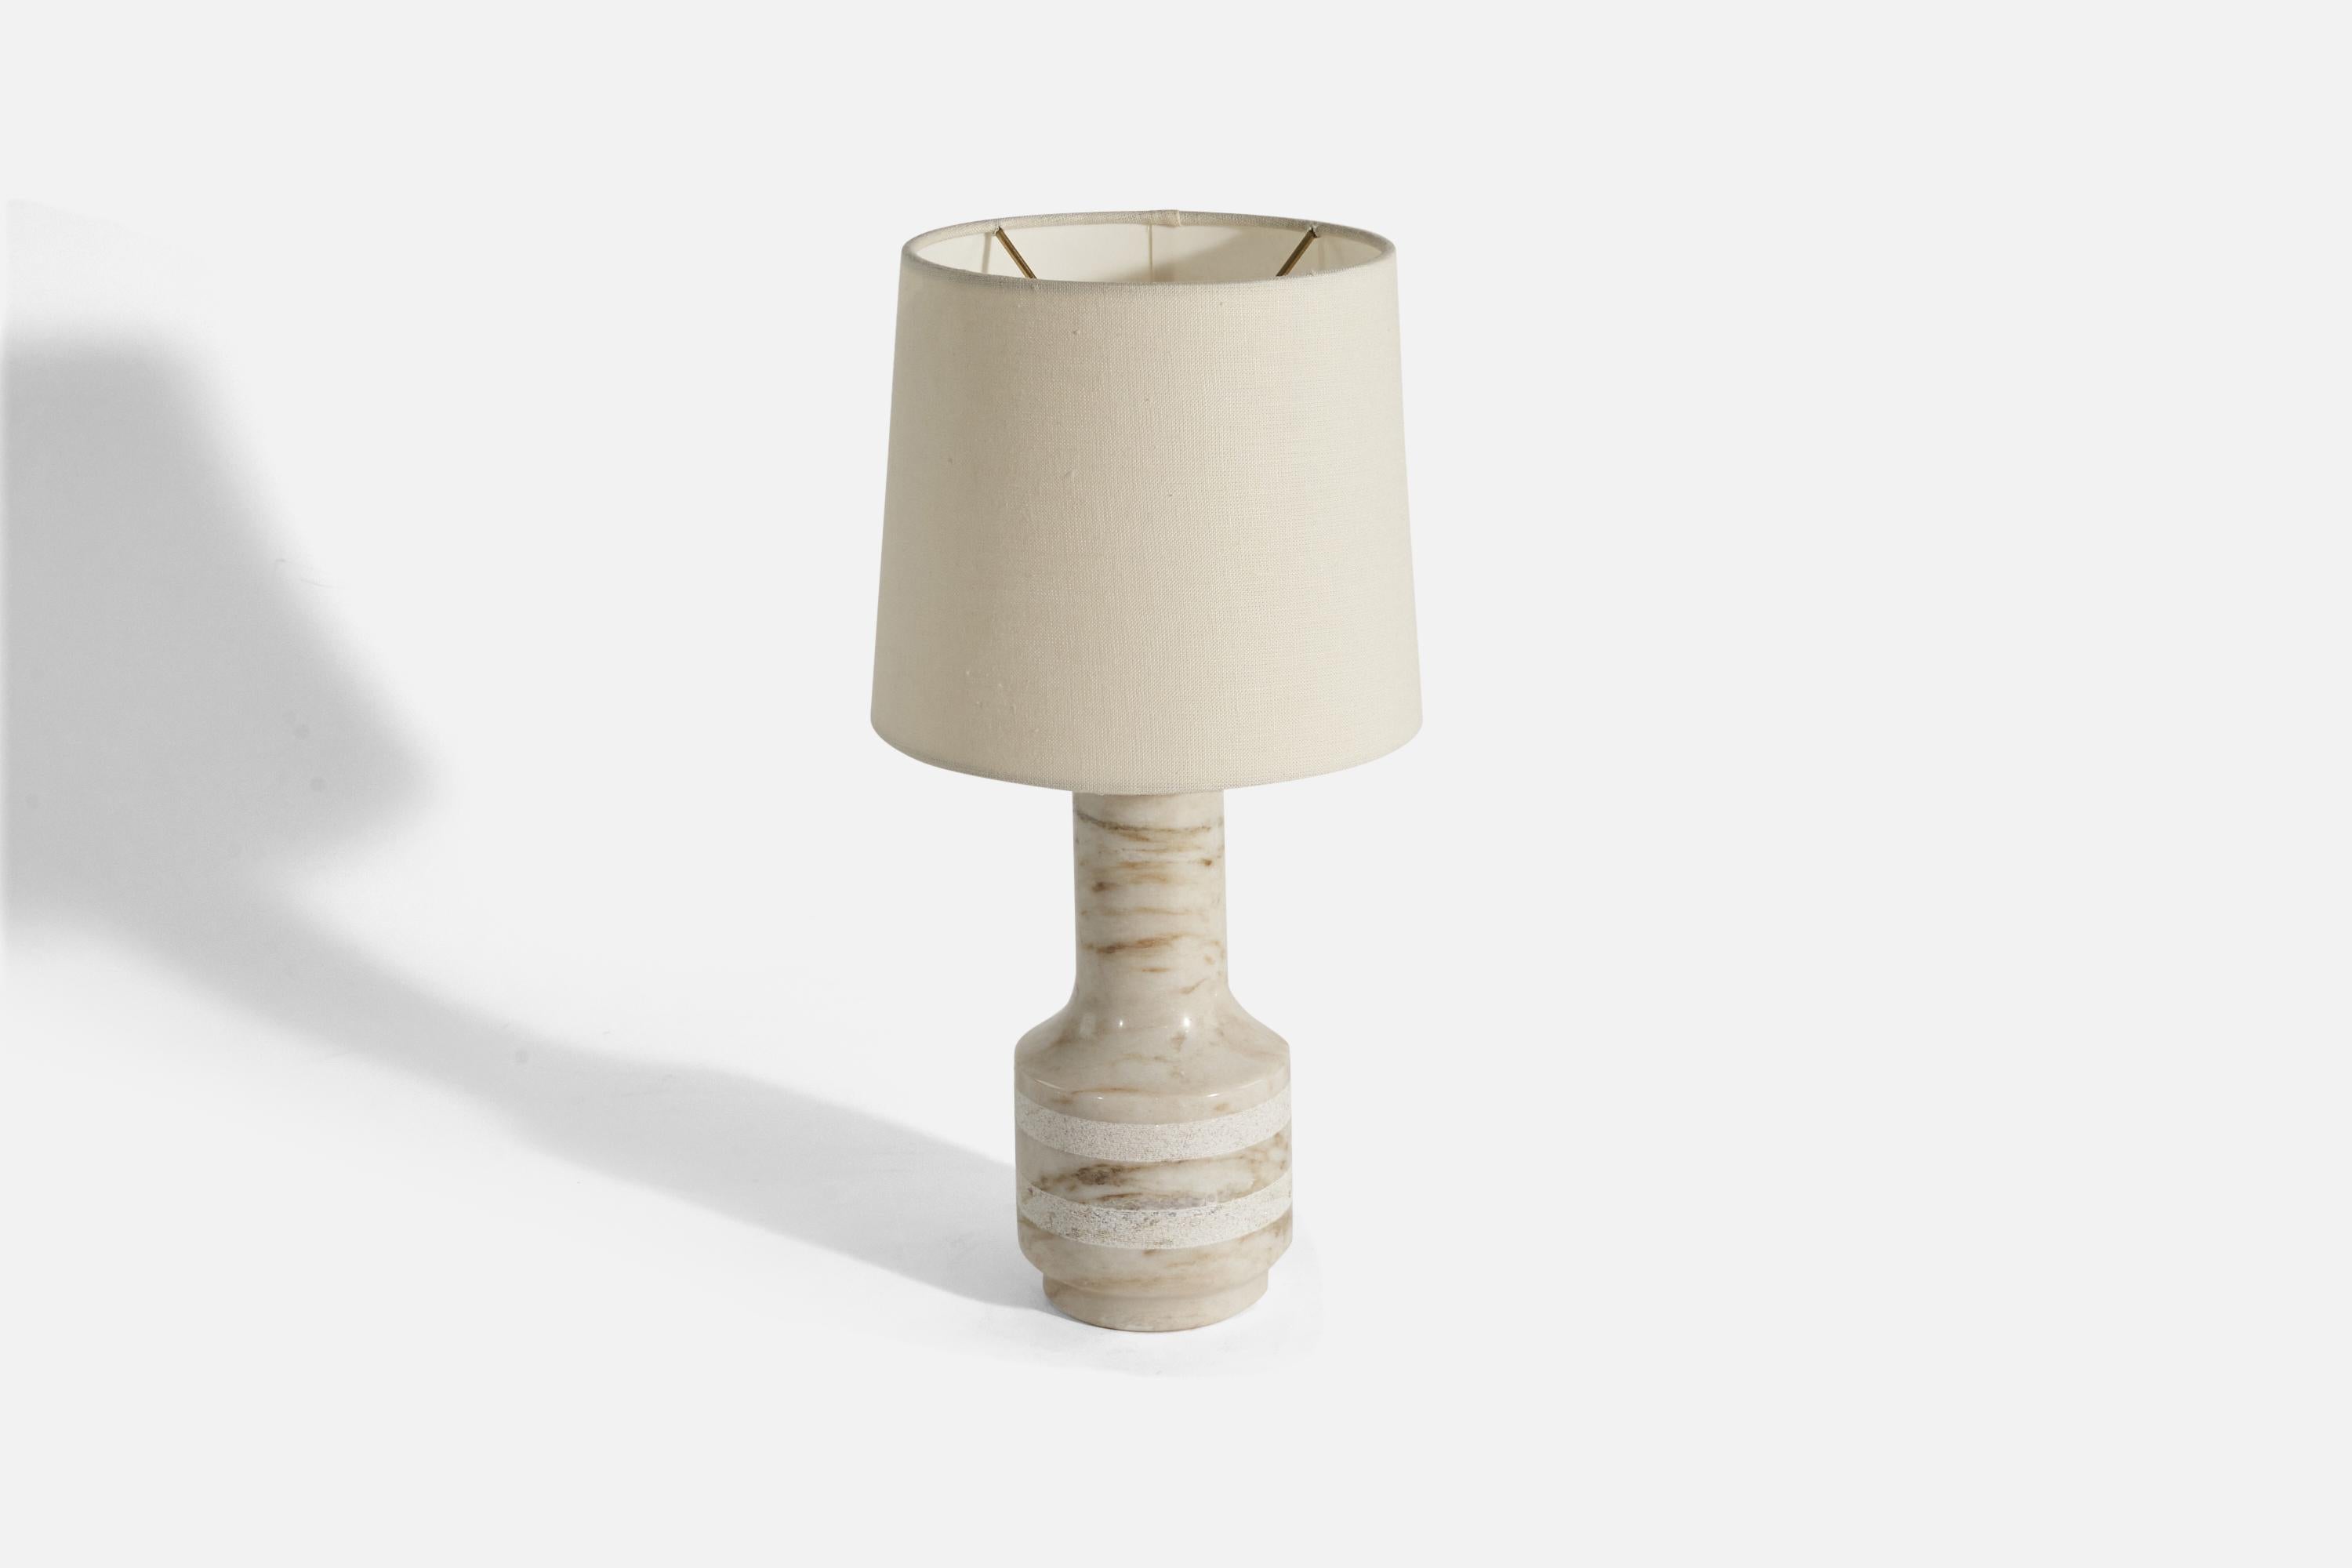 A Carrara marble table lamp designed and produced in Sweden, 1970s. 

Sold without Lampshade(s).
Dimensions of Lamp (inches) : 12.43 x 4.24 x 4.24 (Height x Width x Depth)
Dimensions of Shade (inches) : 7 x 8 x 7 (Top Diameter x Bottom Diameter x